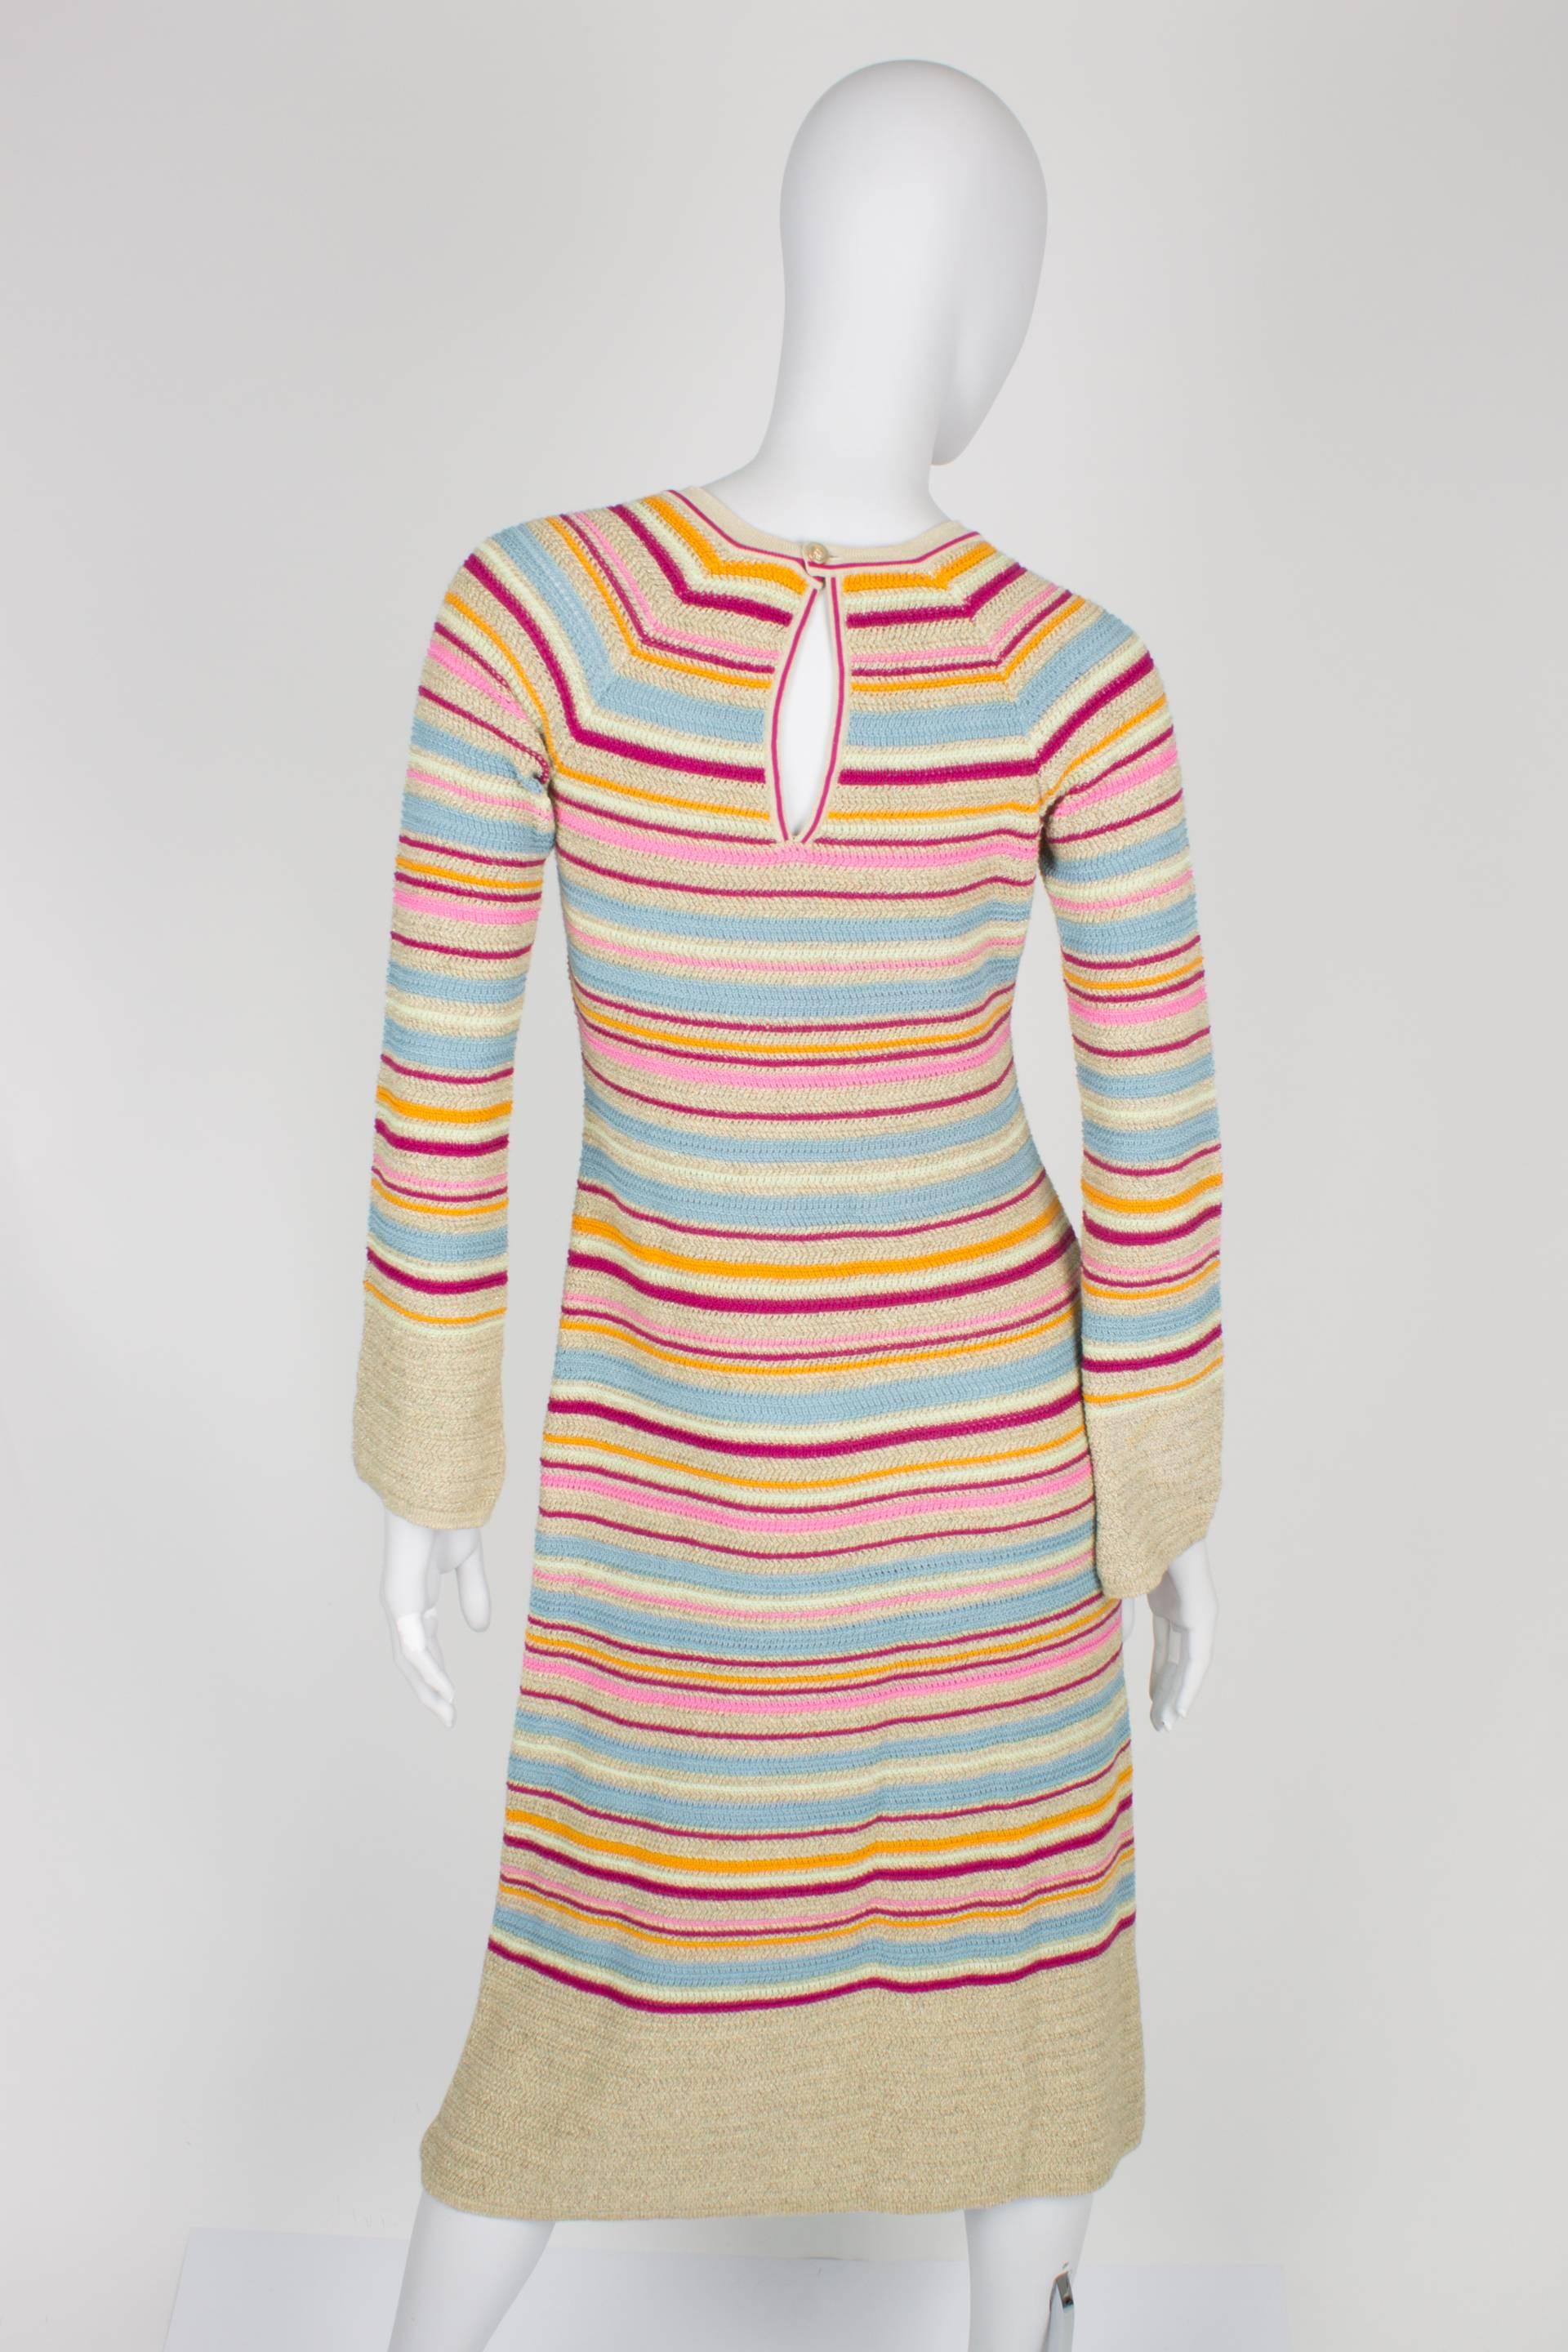 Women's Chanel Tan and Multi-Colored Cotton Knit Long Striped Dress Resort 2011 